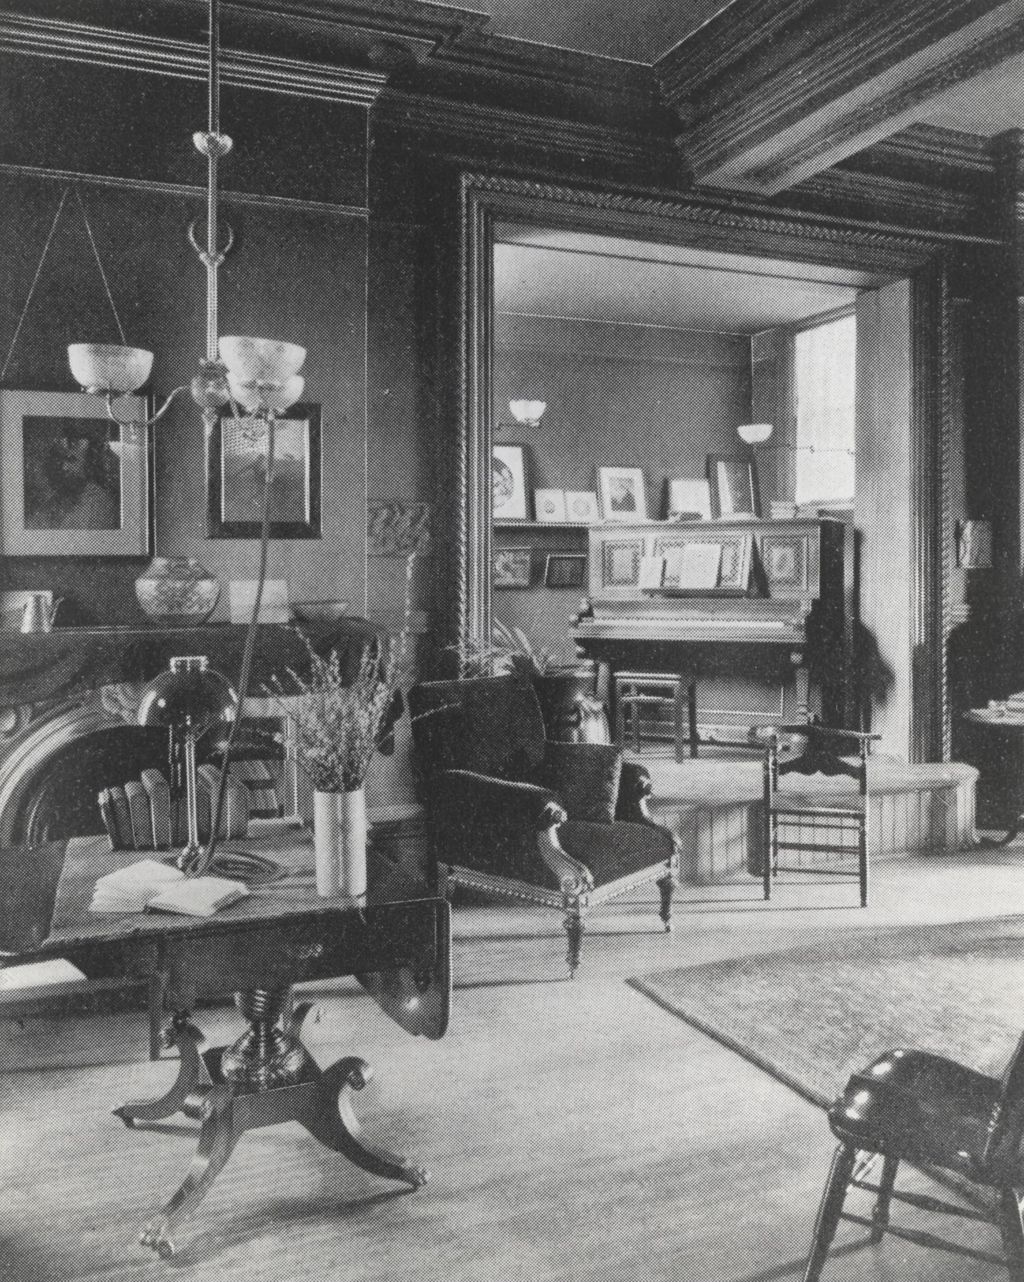 Hull-House reception room and elevated music alcove